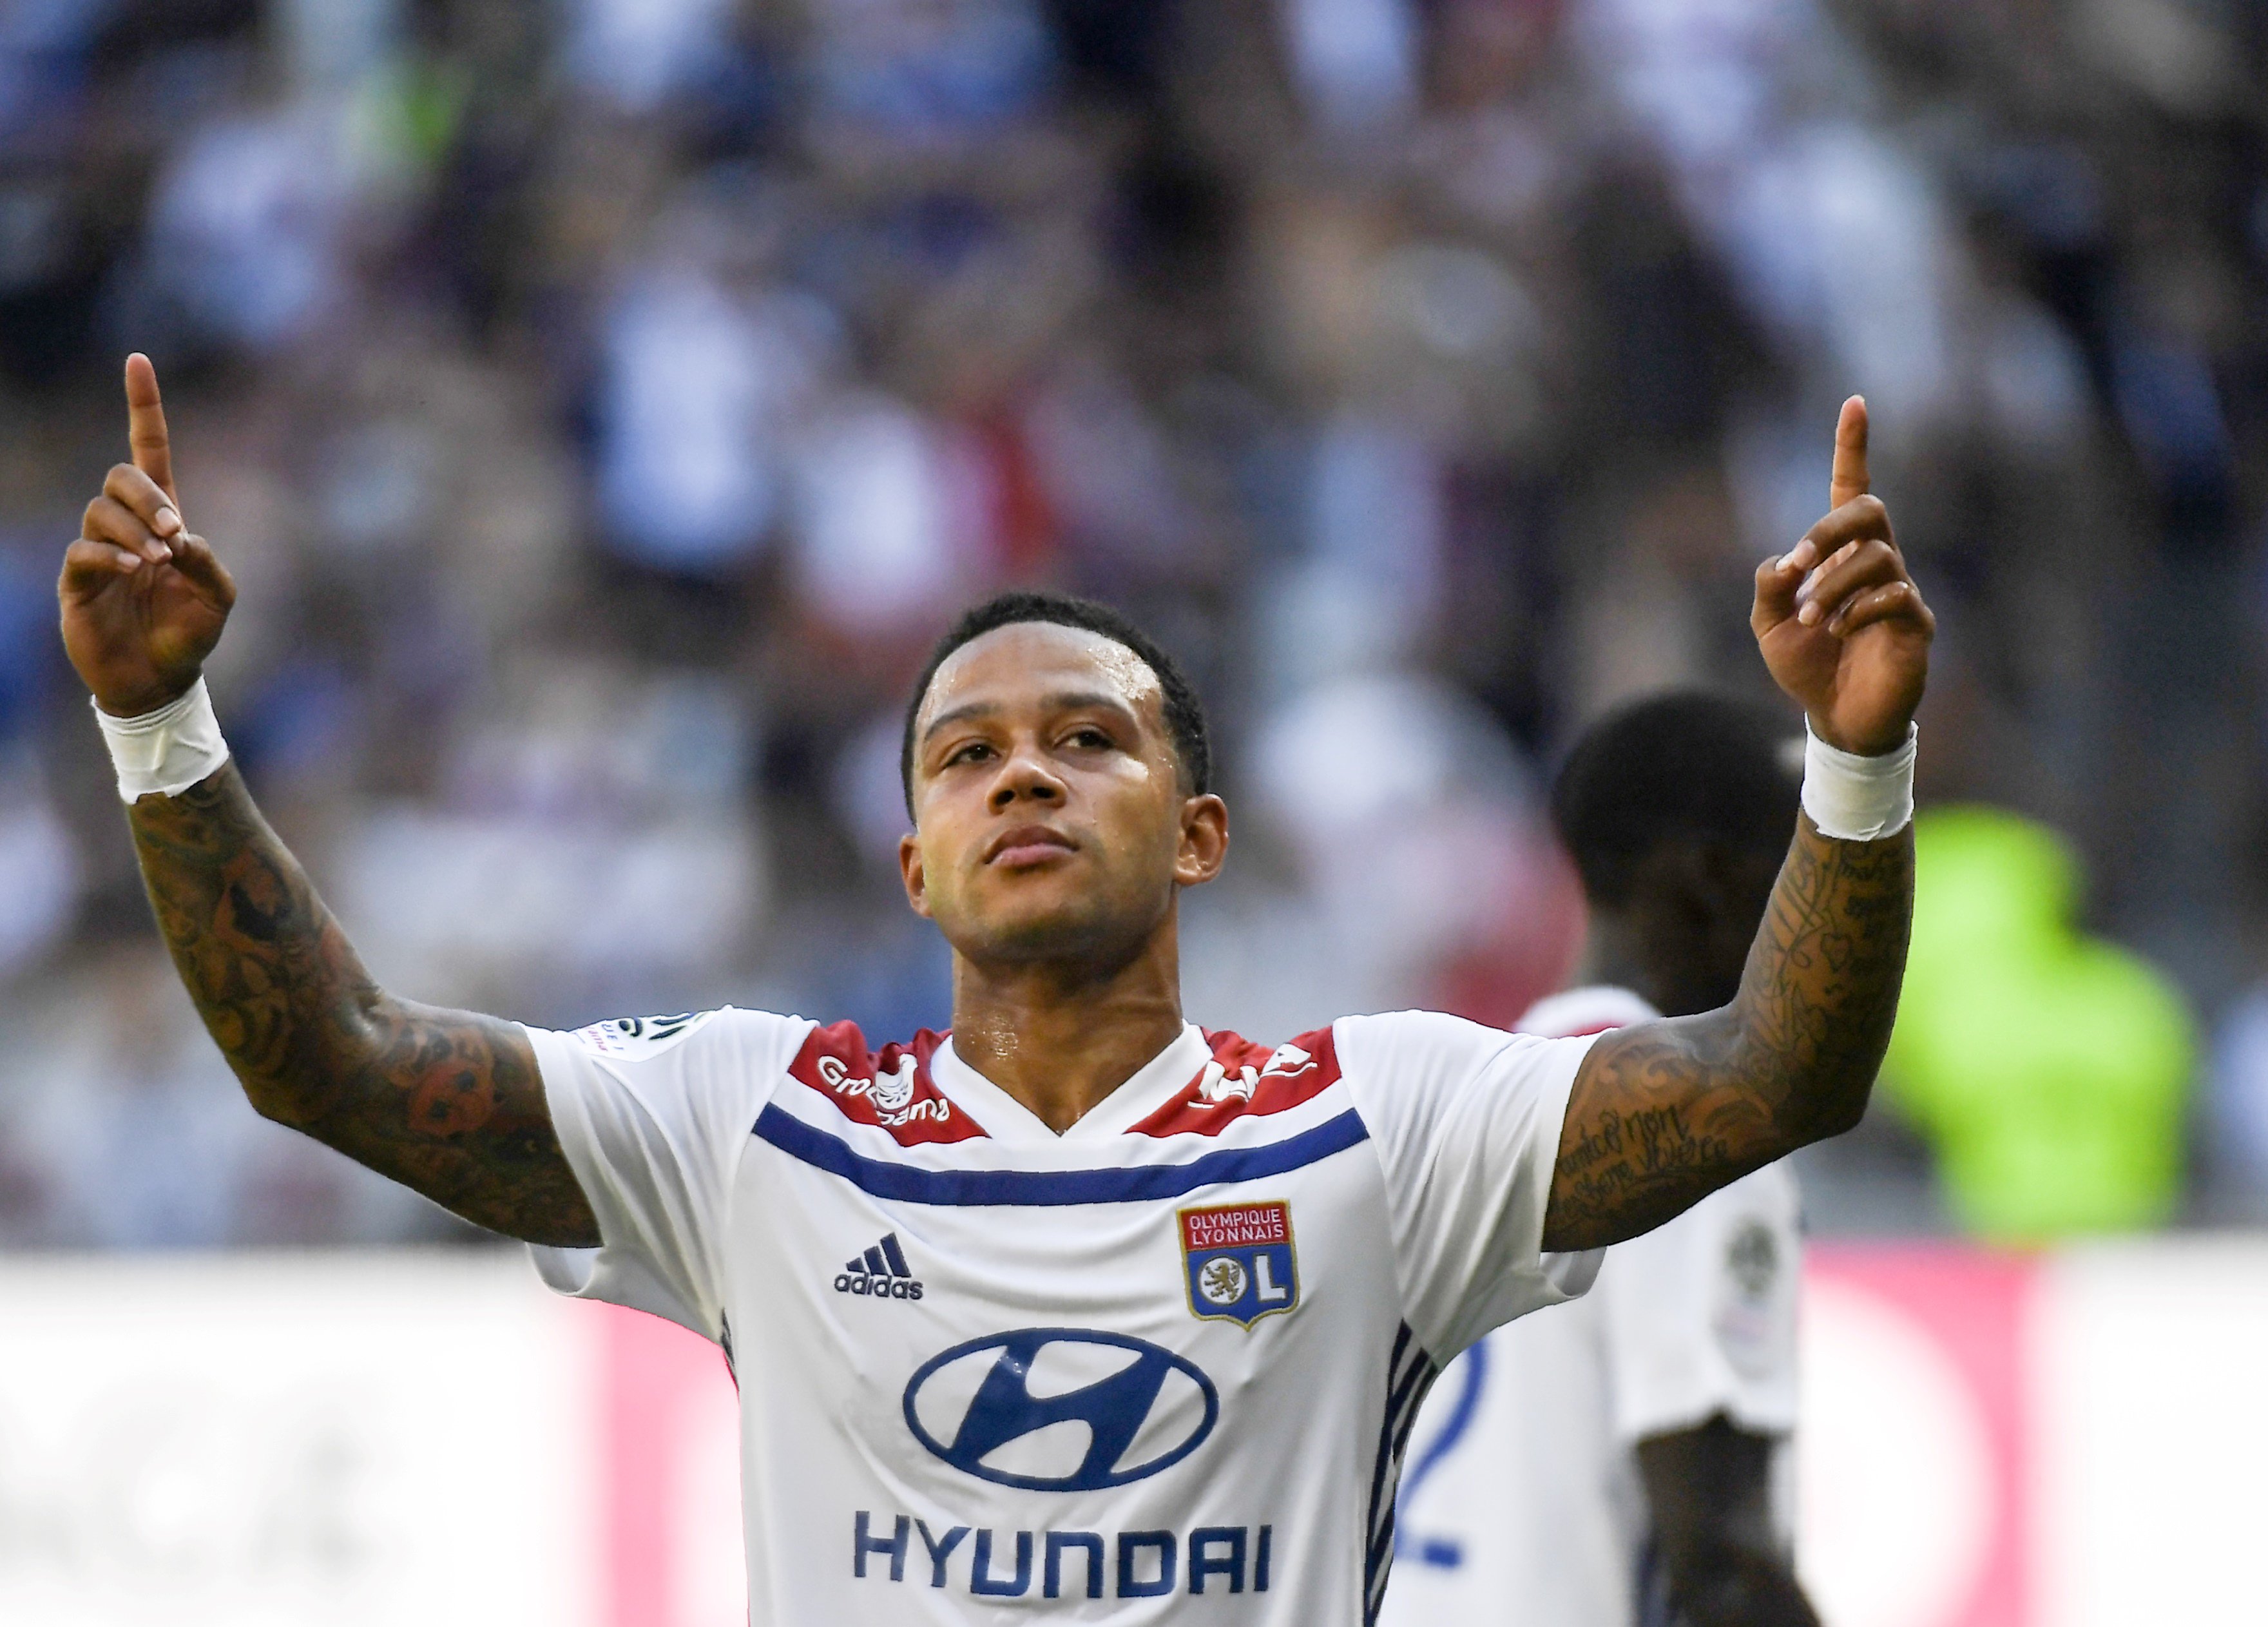 Memphis Depay releases new song on 29th birthday, aims subtle dig